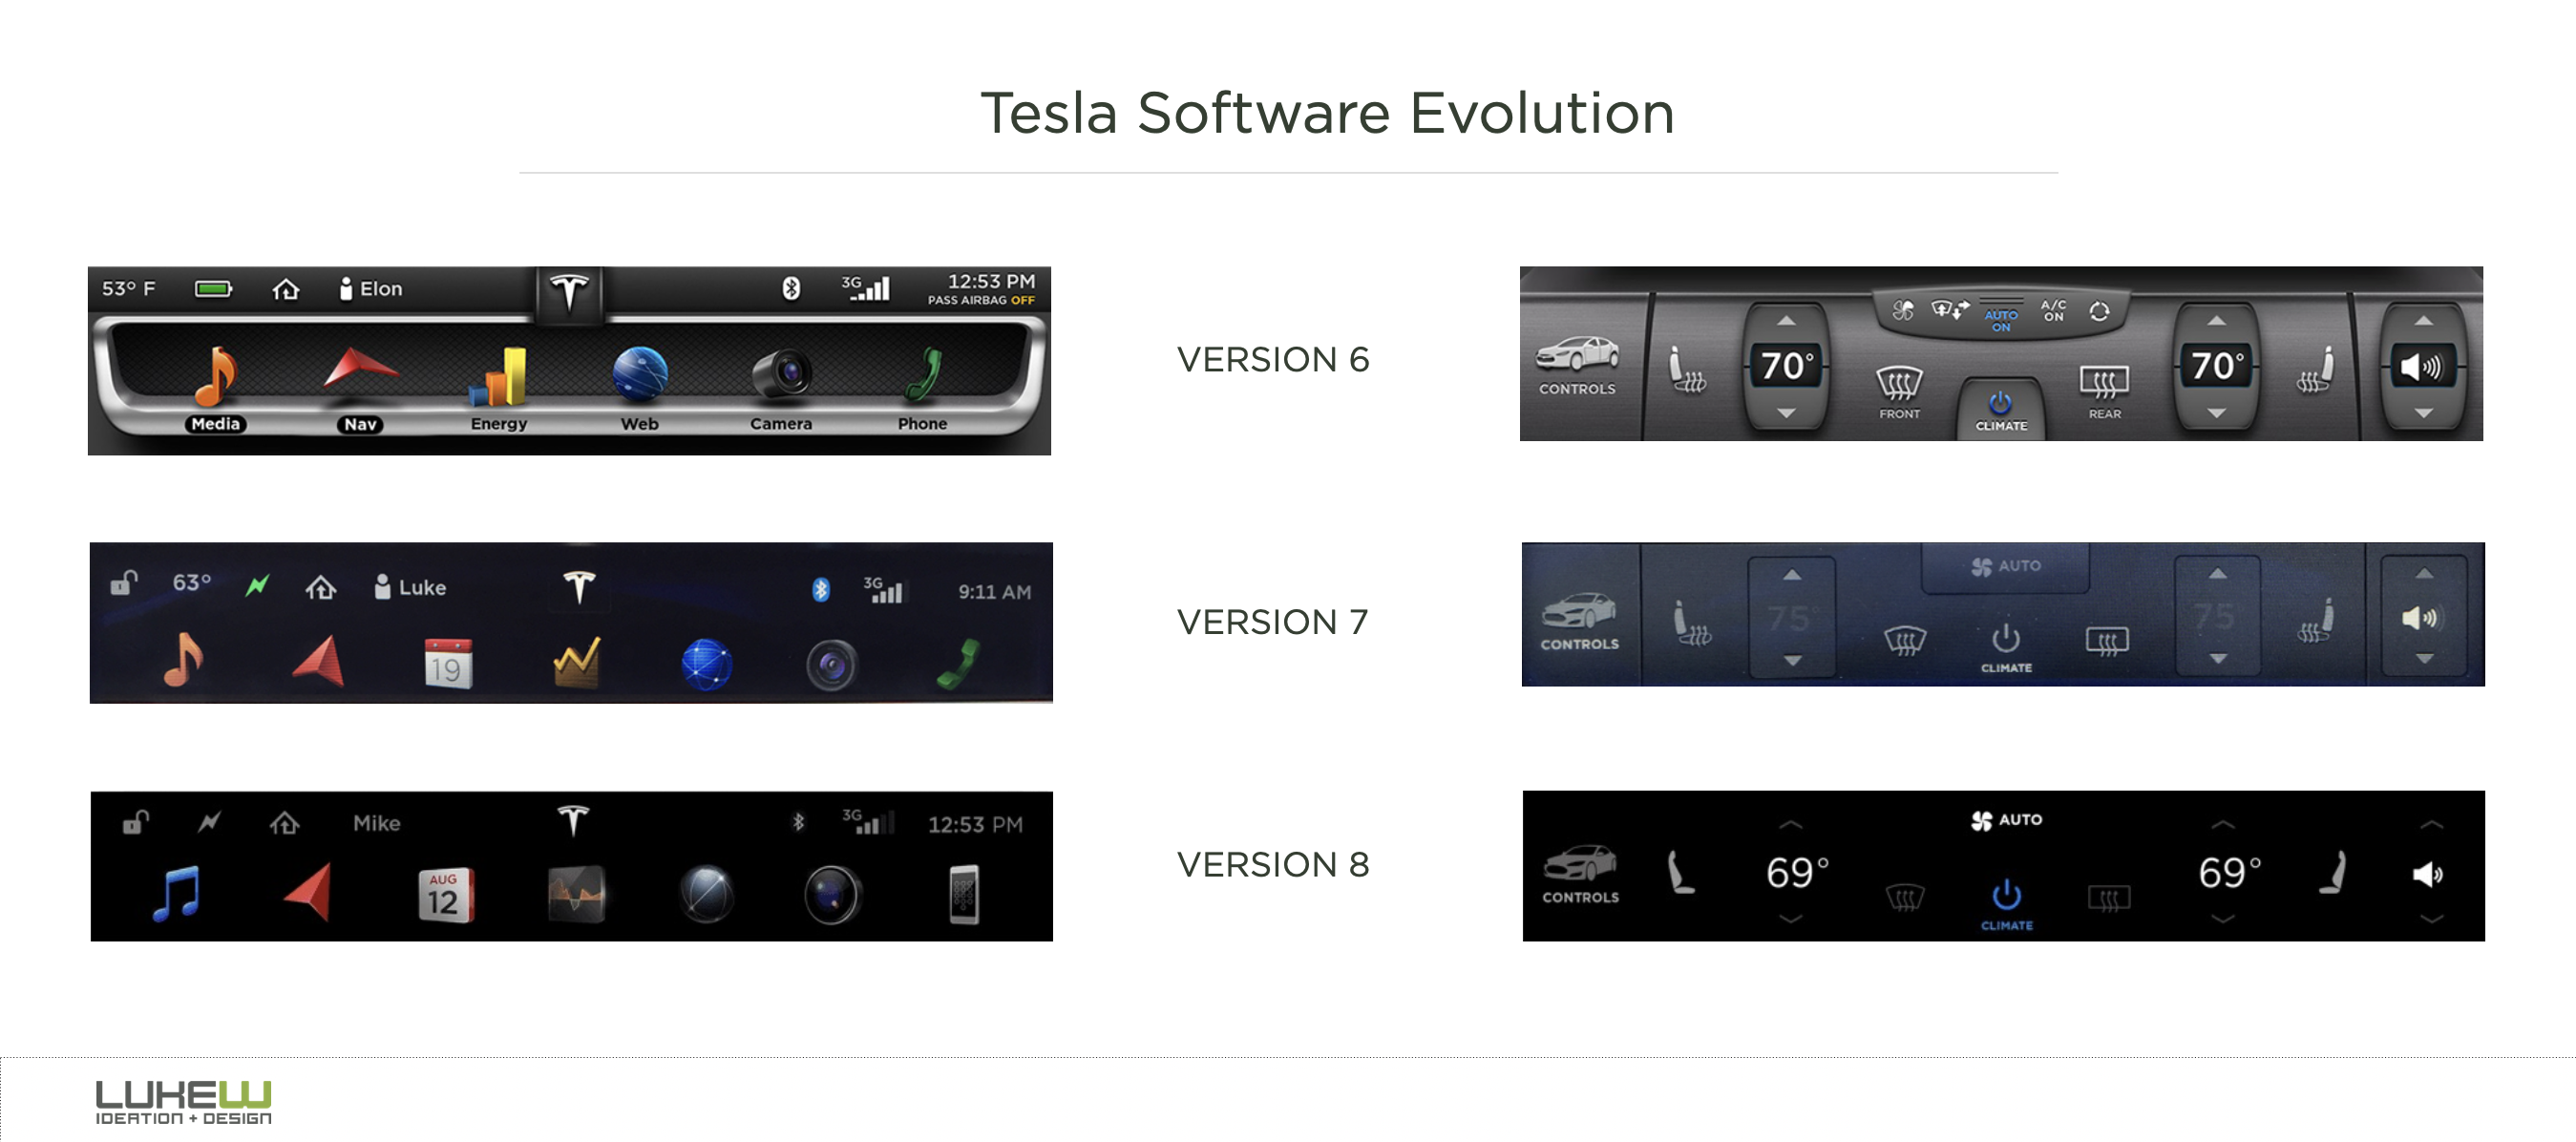 Design is never done: the Tesla OS edition